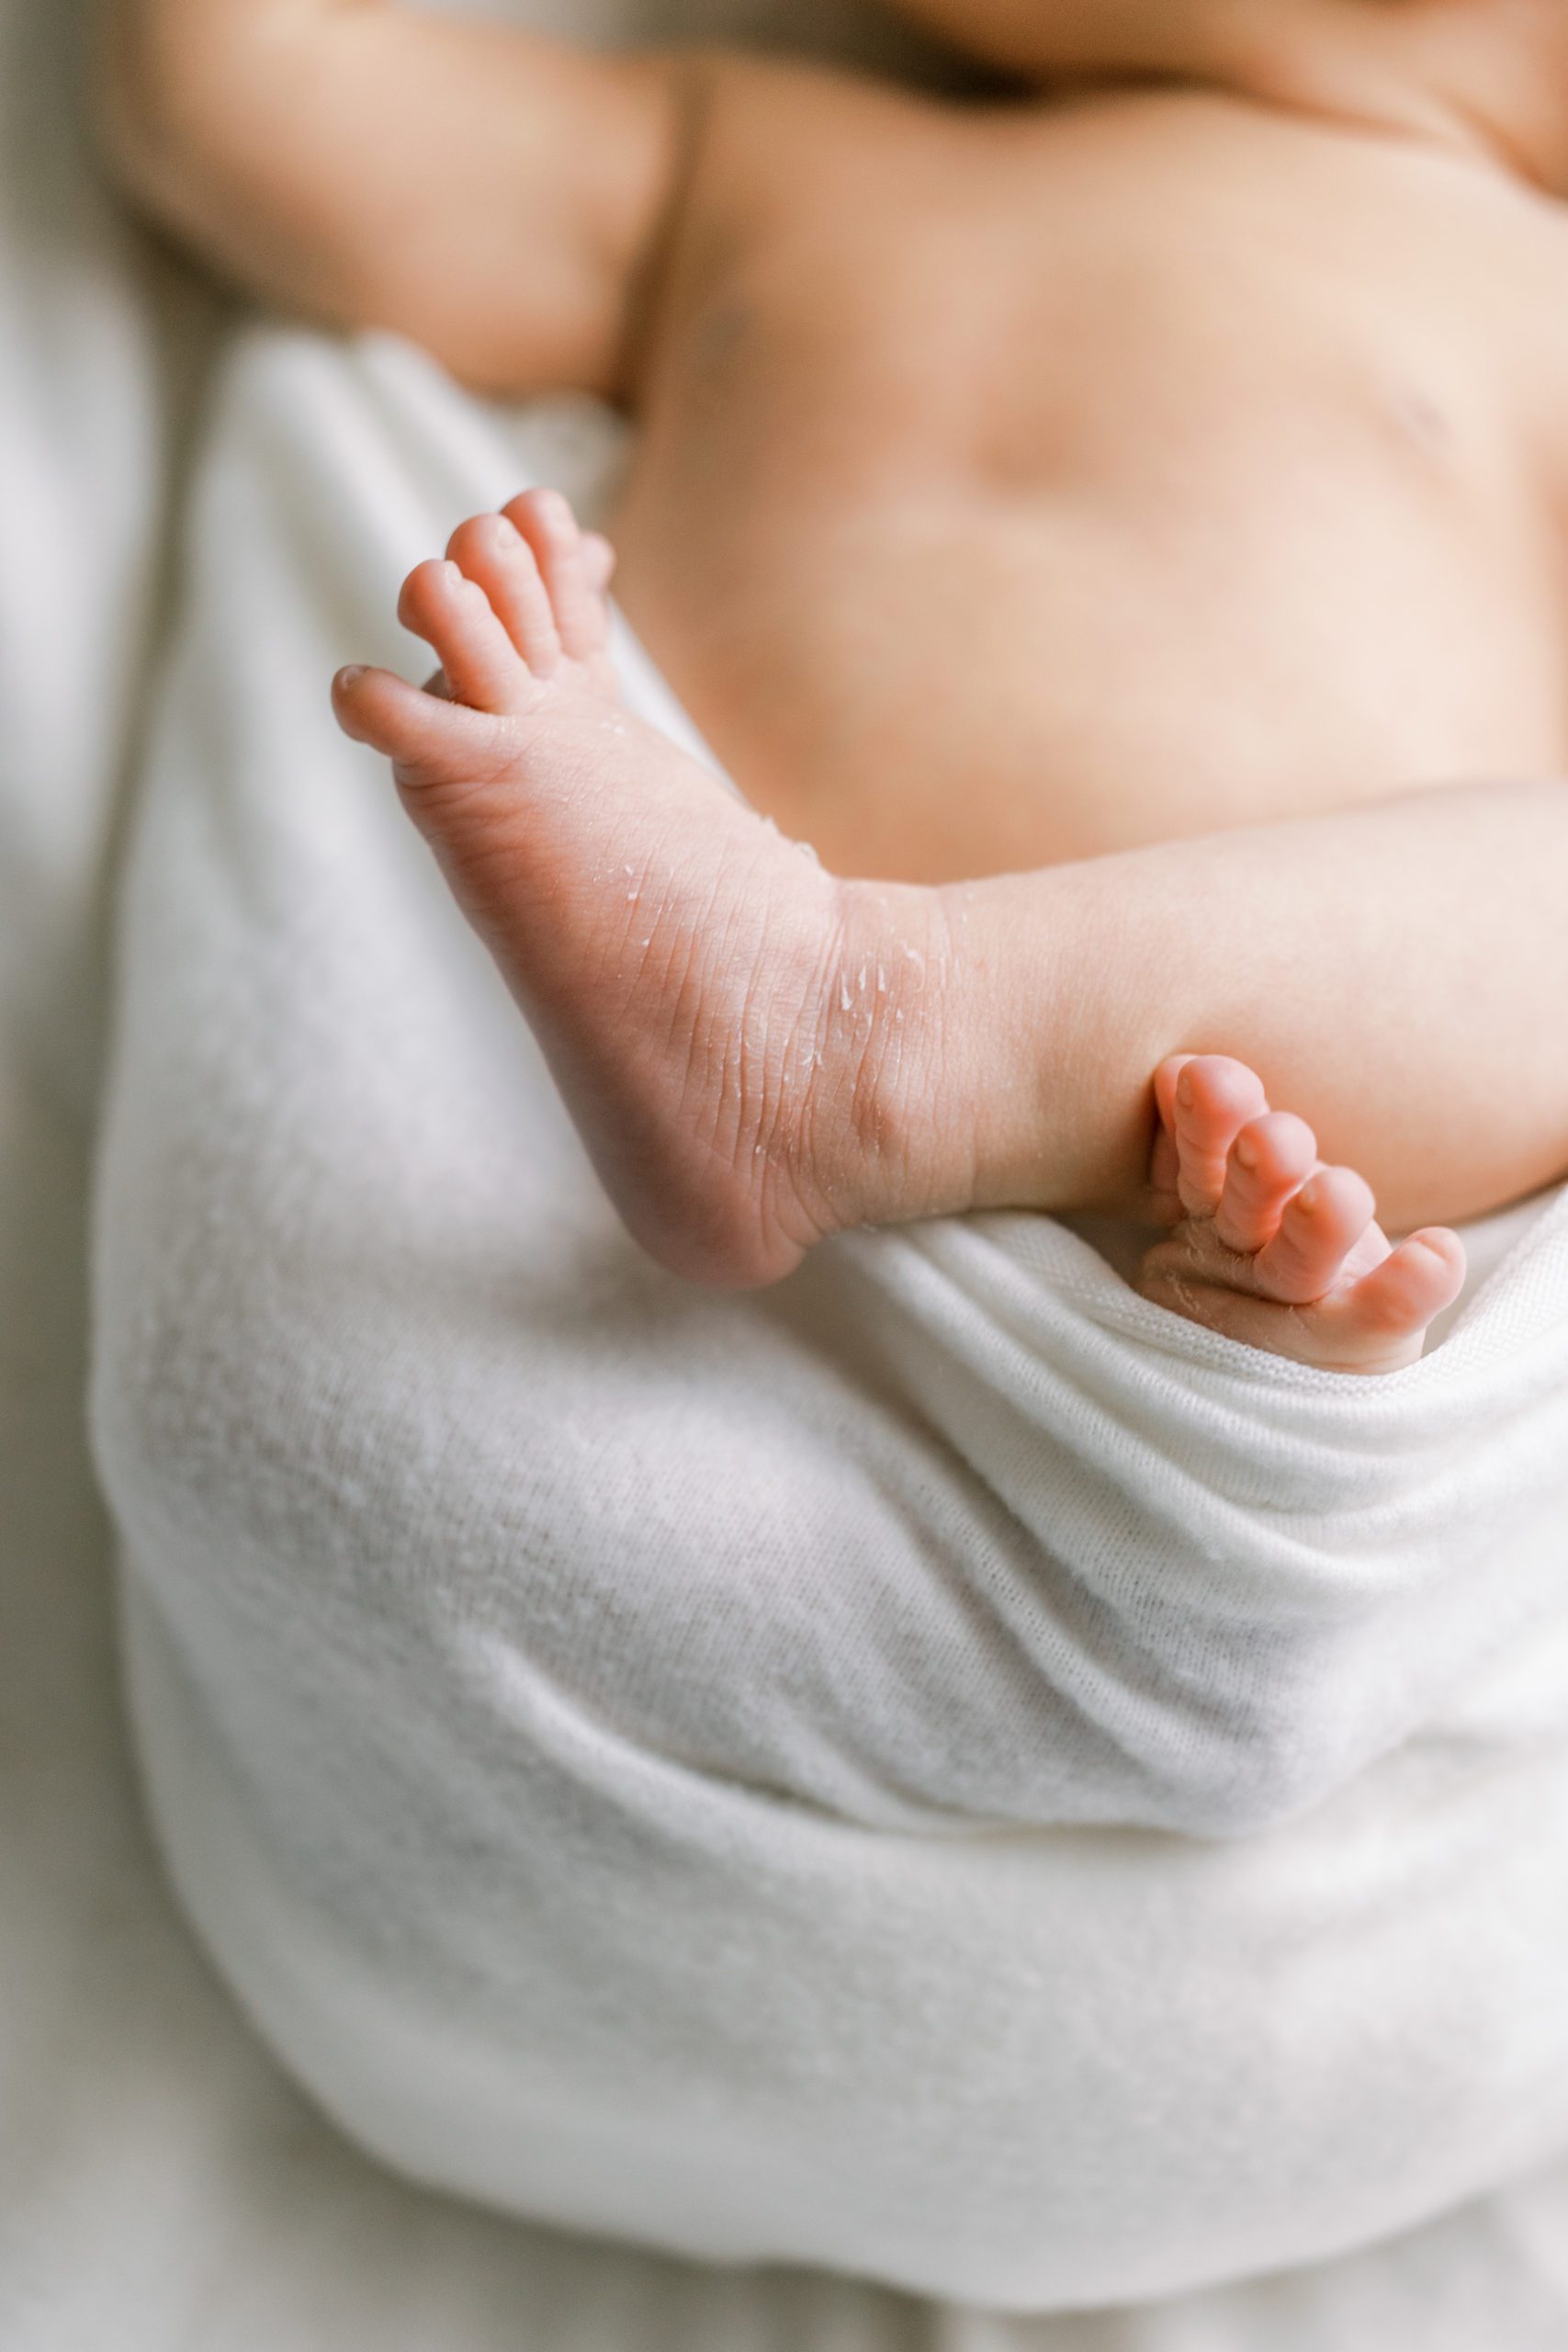 how to choose a newborn photographer, photo of baby's feet